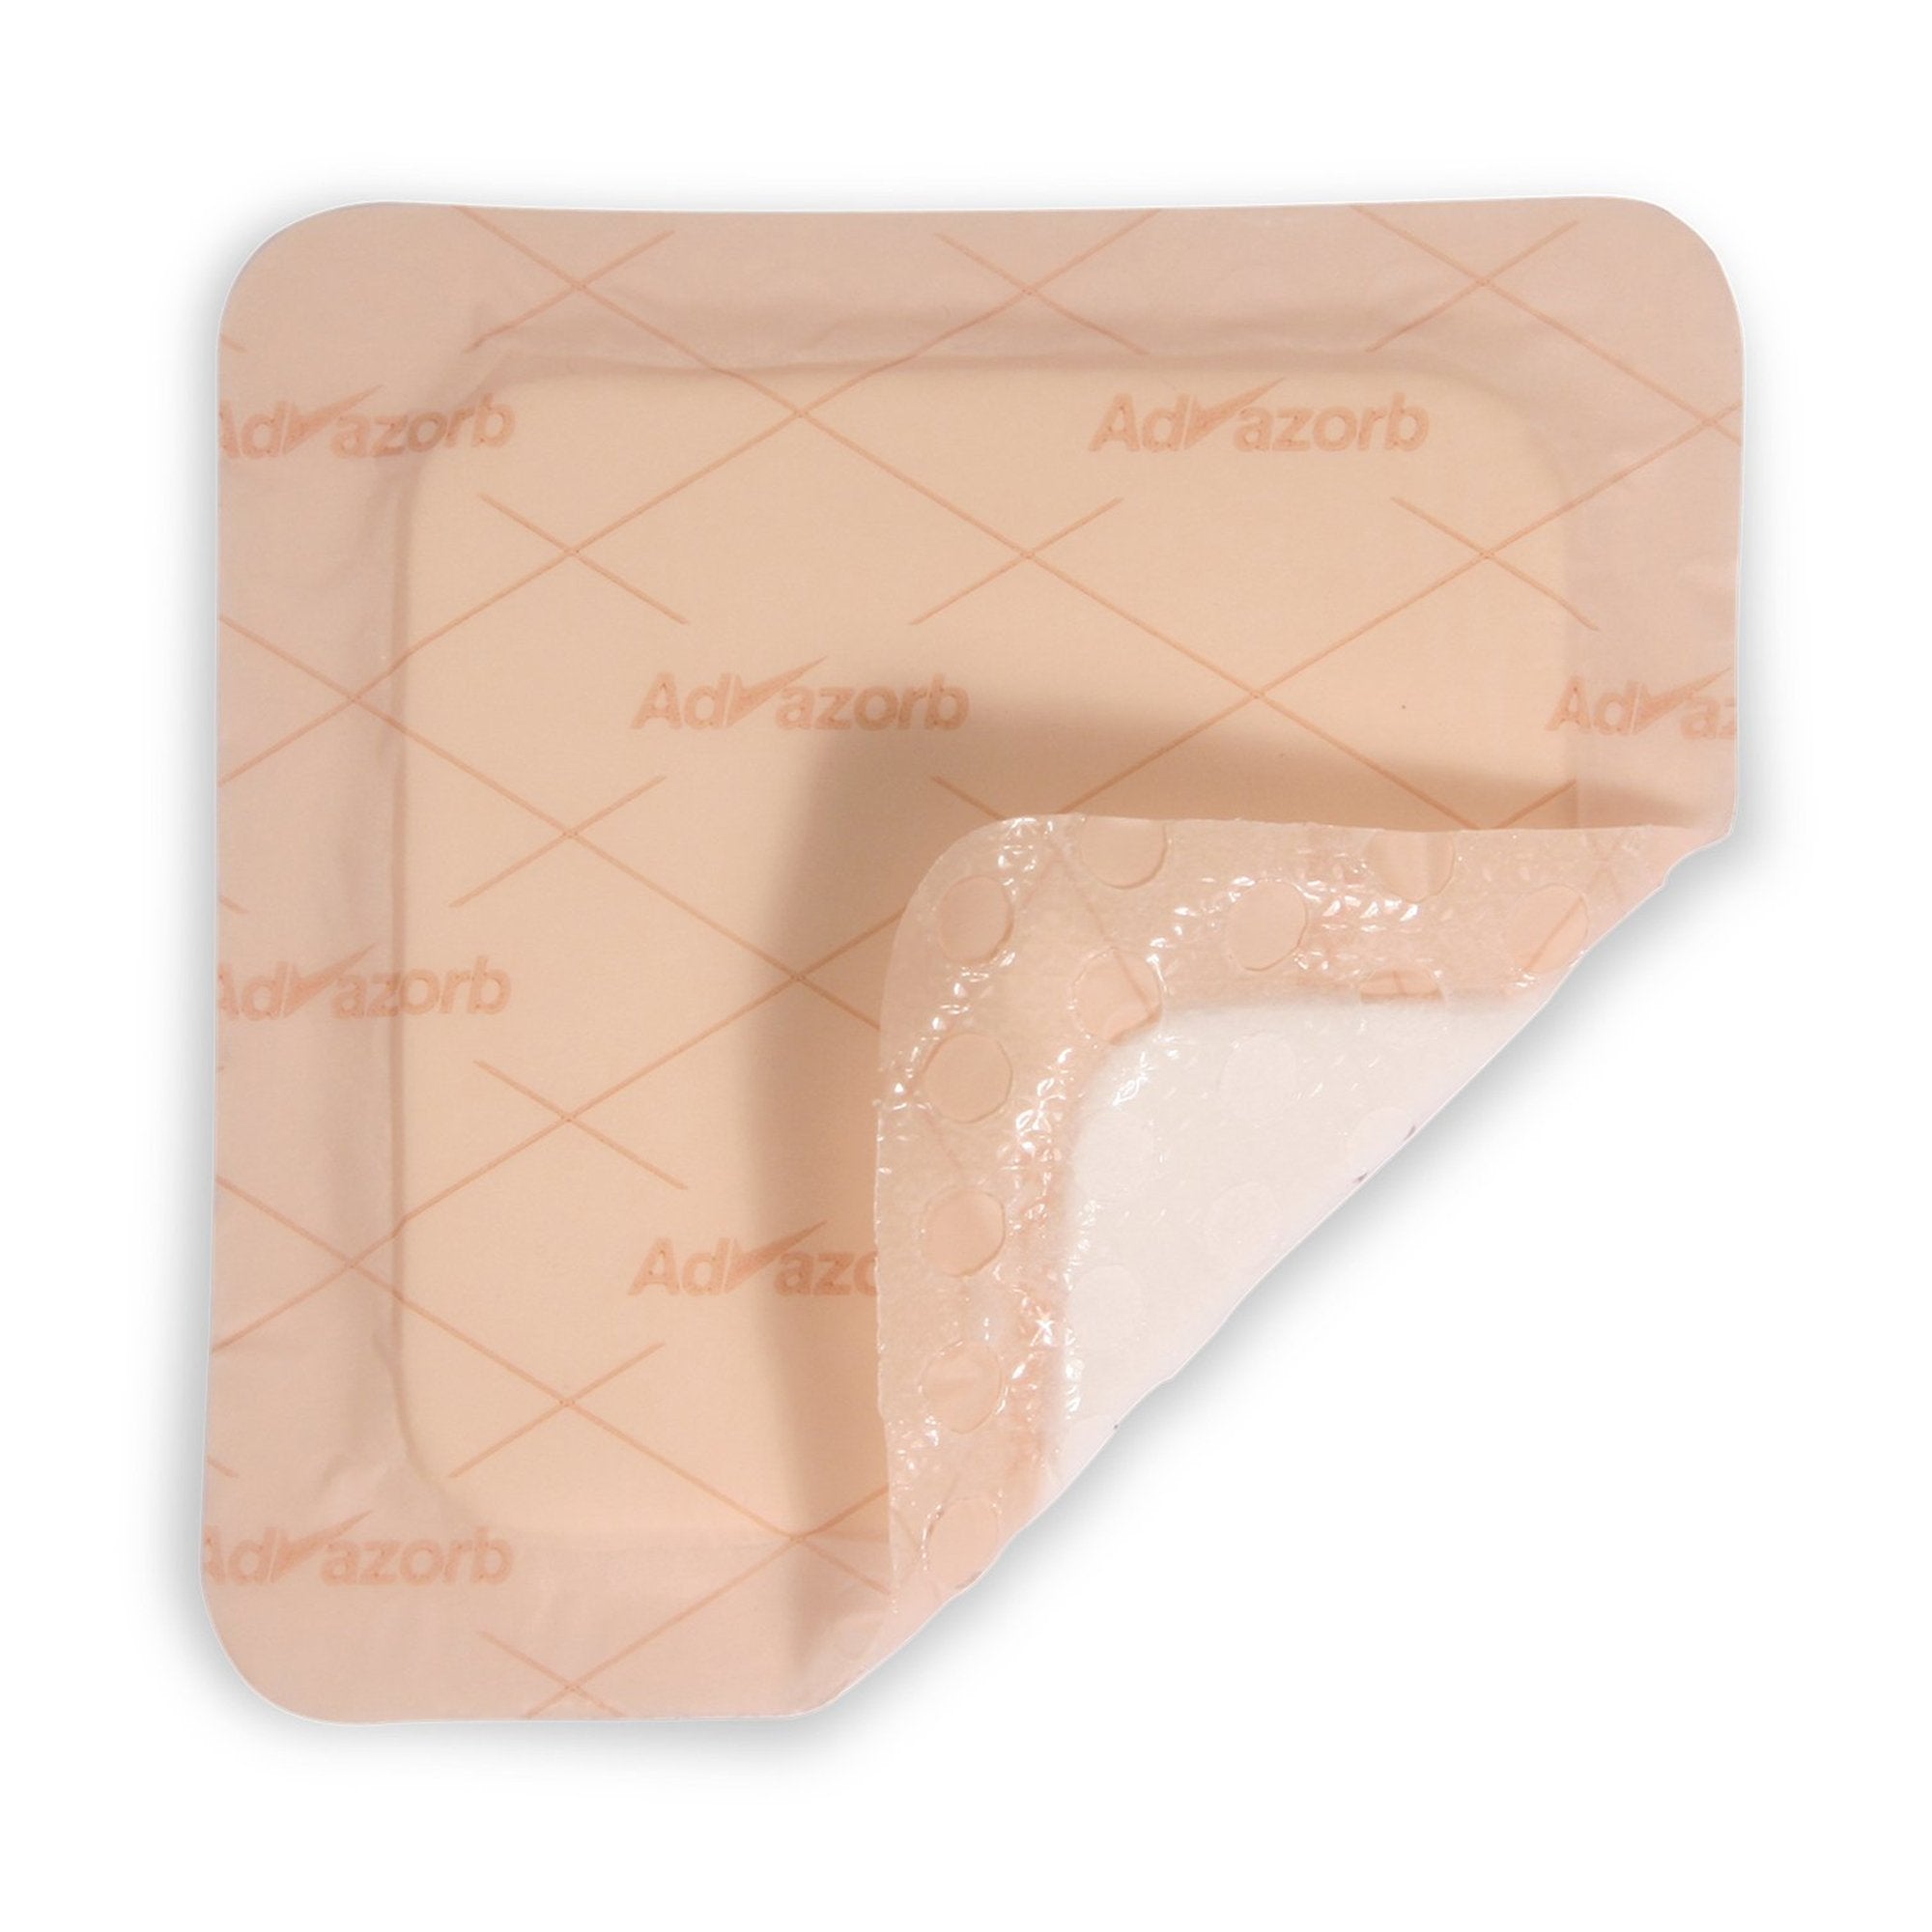 Foam Dressing Advazorb Border® 6 X 6 Inch With Border Waterproof Backing Silicone Face and Border Square Sterile